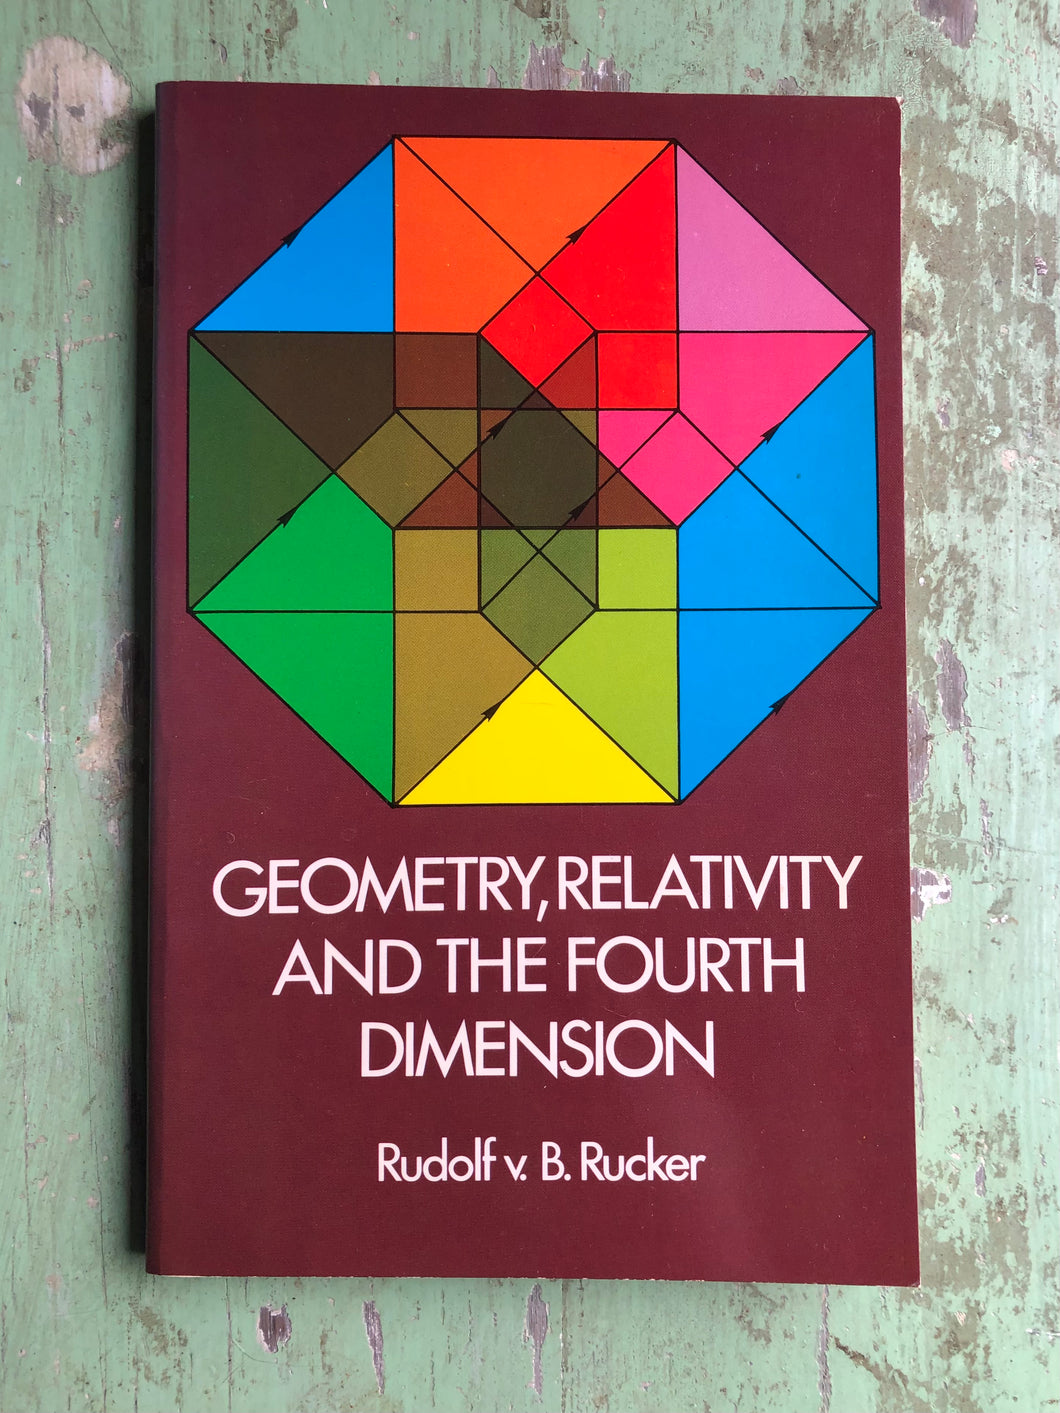 Geometry, Relativity and the Fourth Dimension. by Rudolf v.B. Rucker